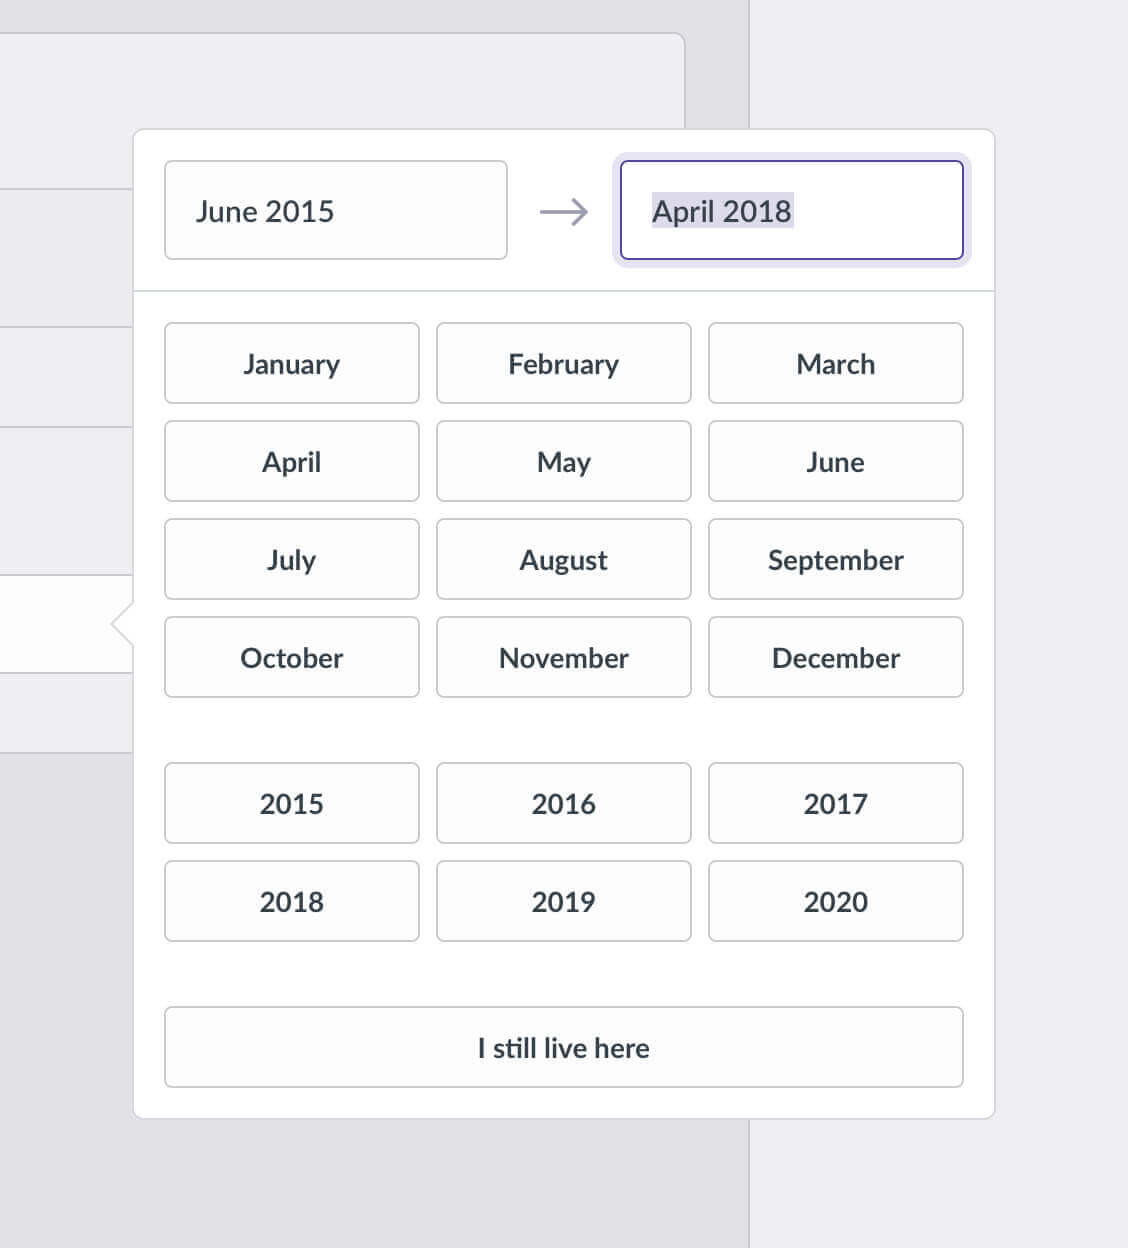 A custom date component, allowing Agents to select month/year date ranges in as little as two clicks.